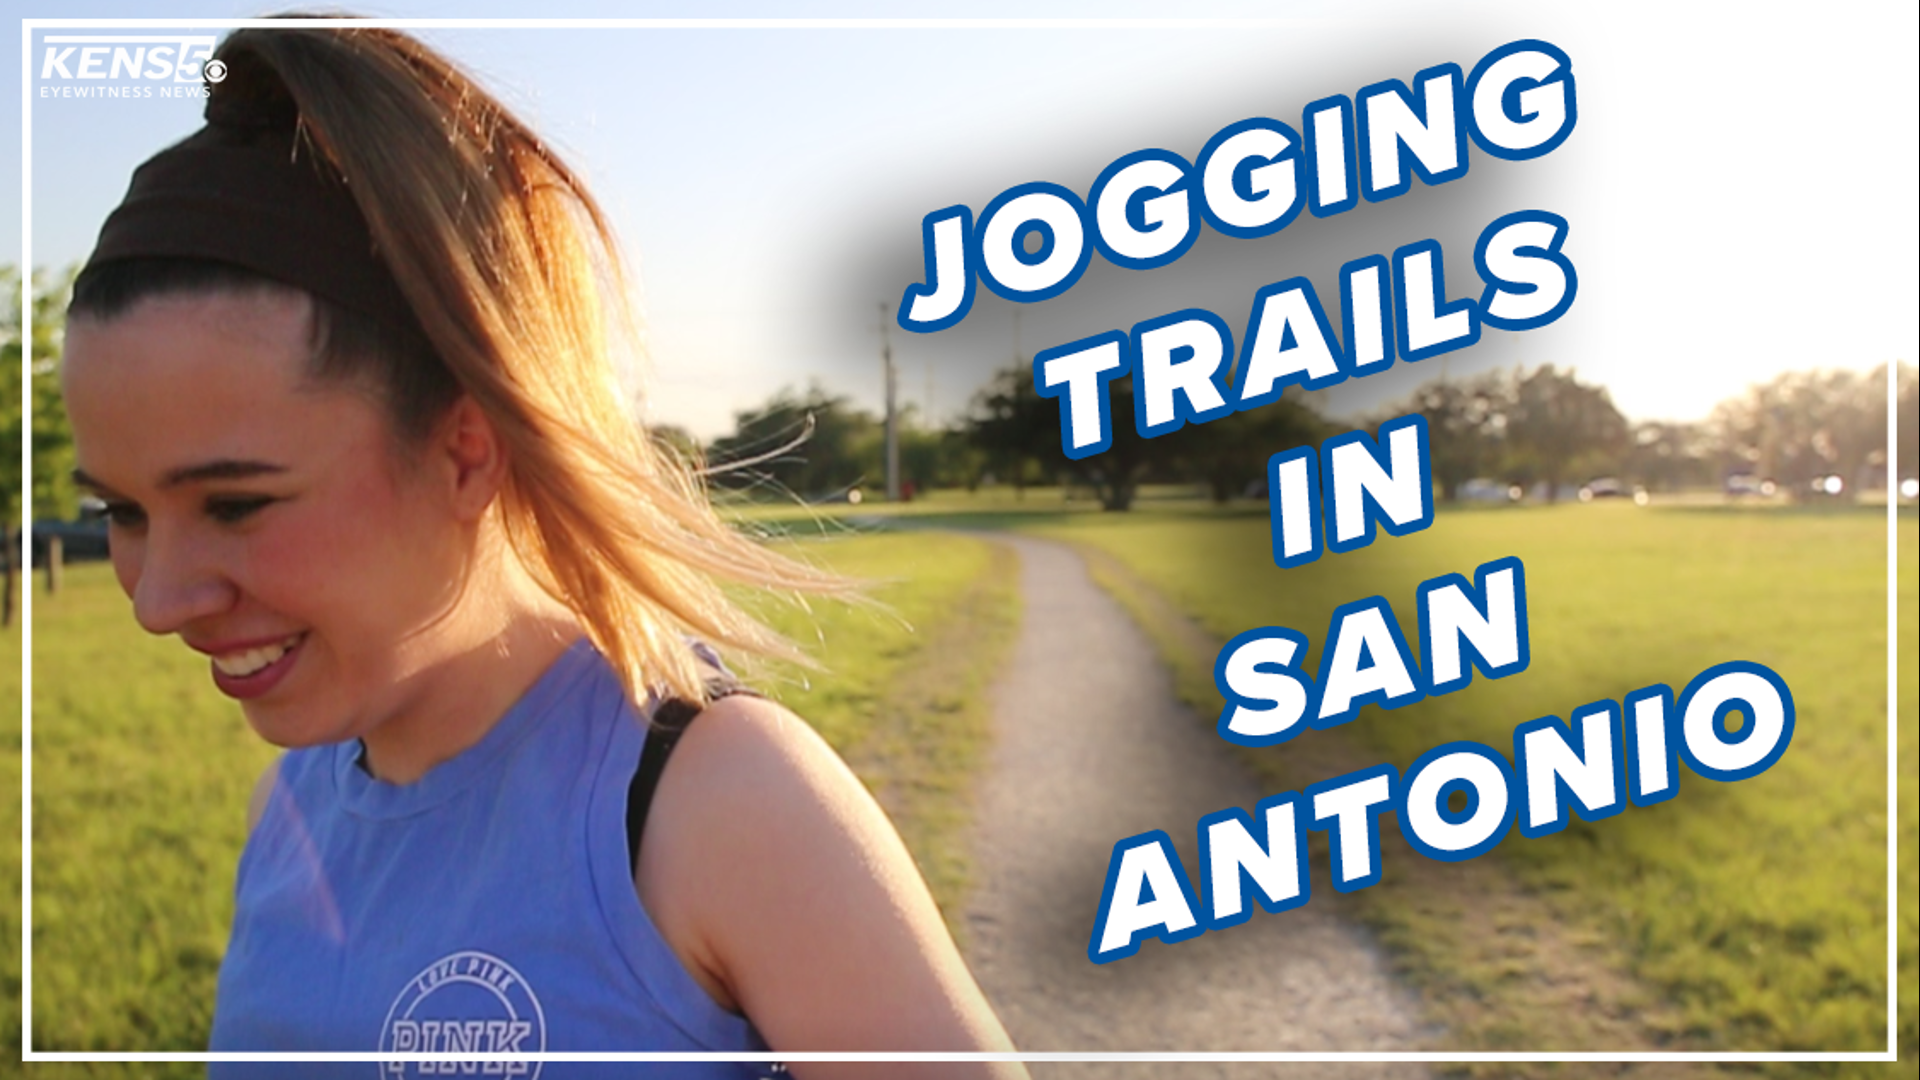 If you're looking to put those athletic shoes to use while still practicing social distance, here are some trails you can check out in San Antonio.